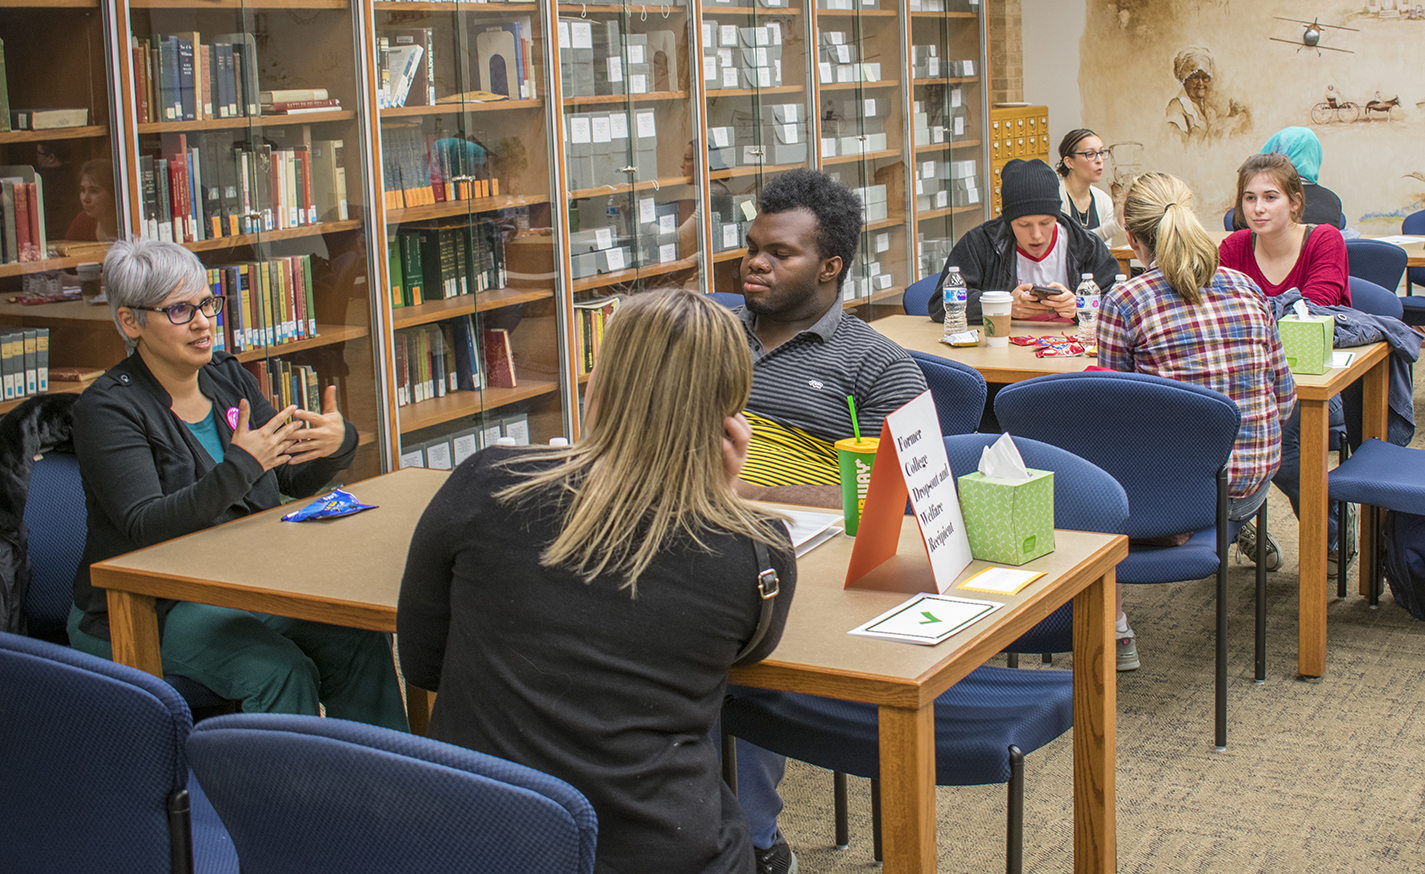 NE English associate professor Rebecca Balcarcel speaks to students about her own personal experiences and the lessons it taught her April 5 at the campus library.